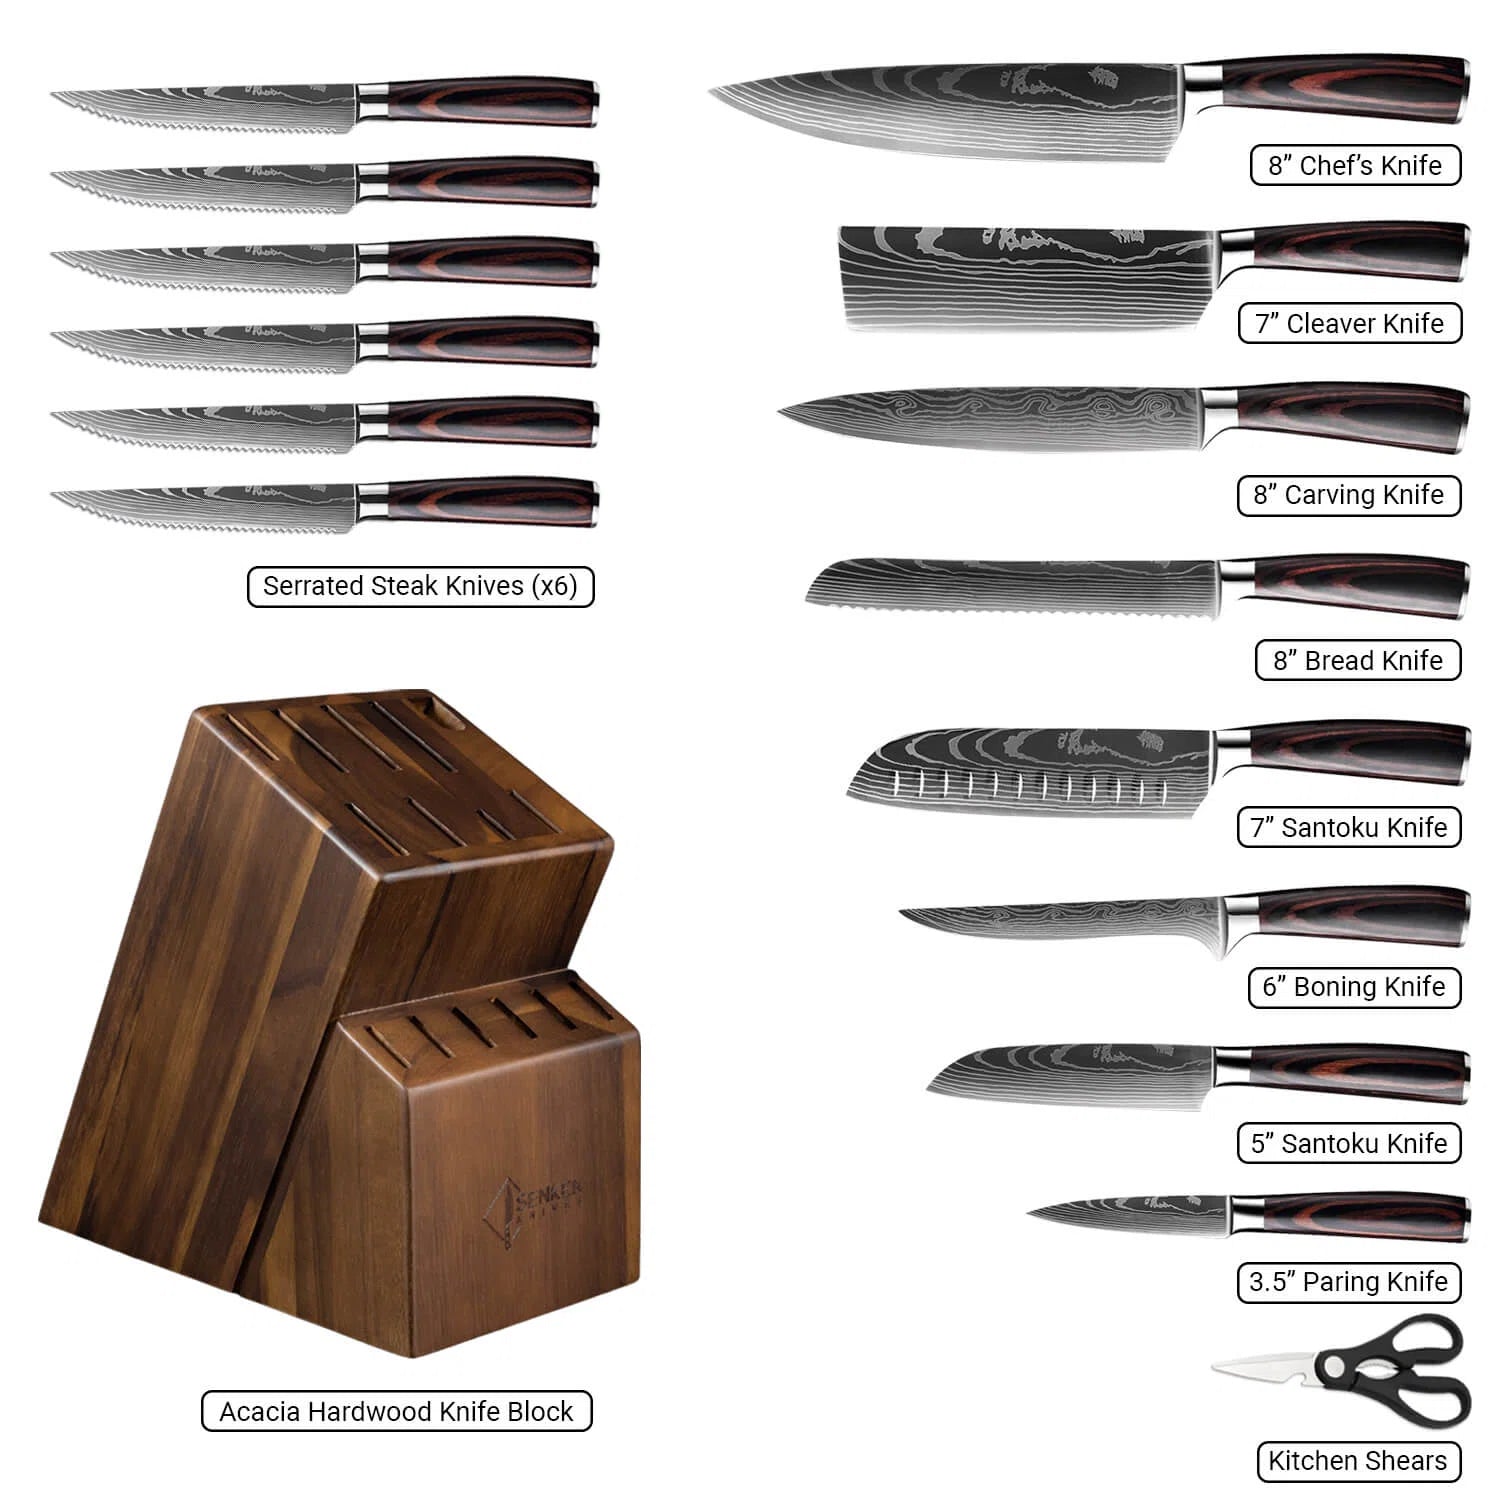 16 Pieces Japanese Style Kitchen Knives - Stainless Steel Blades Chef knives Set